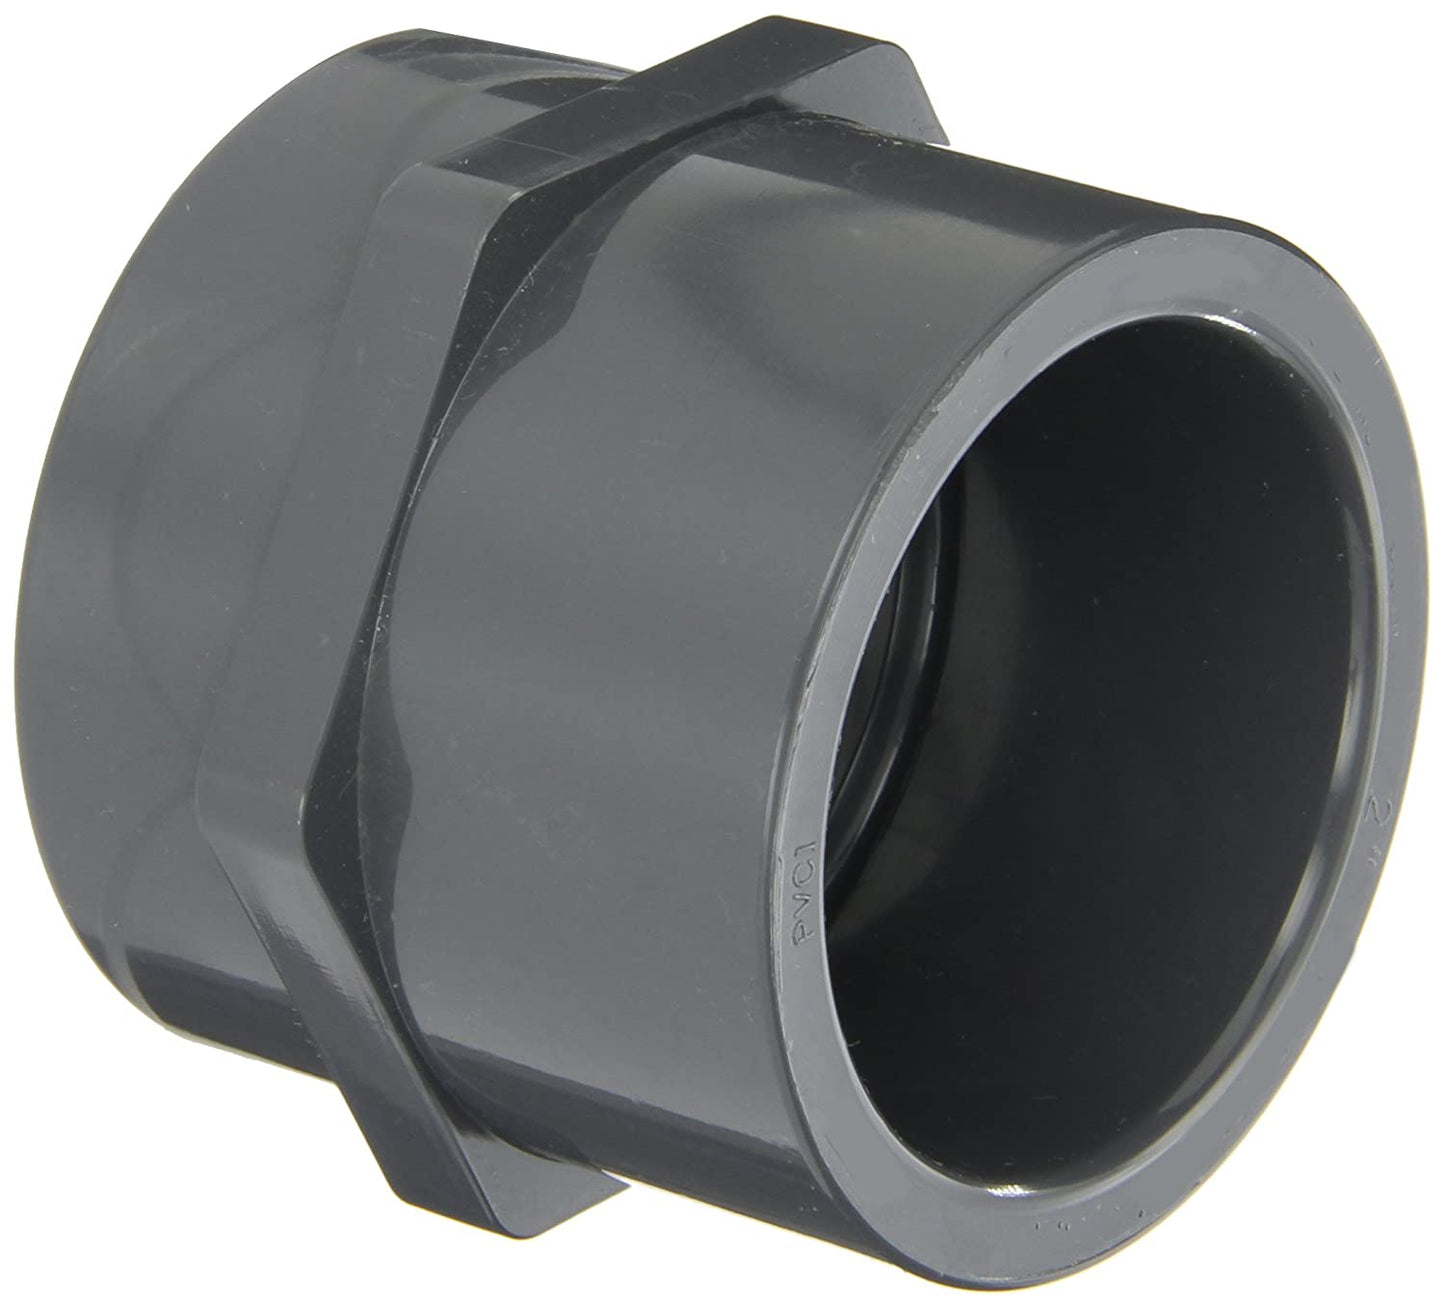 835-020 - PVC Pipe Fitting, Adapter, Schedule 80, 2" Socket x NPT Female